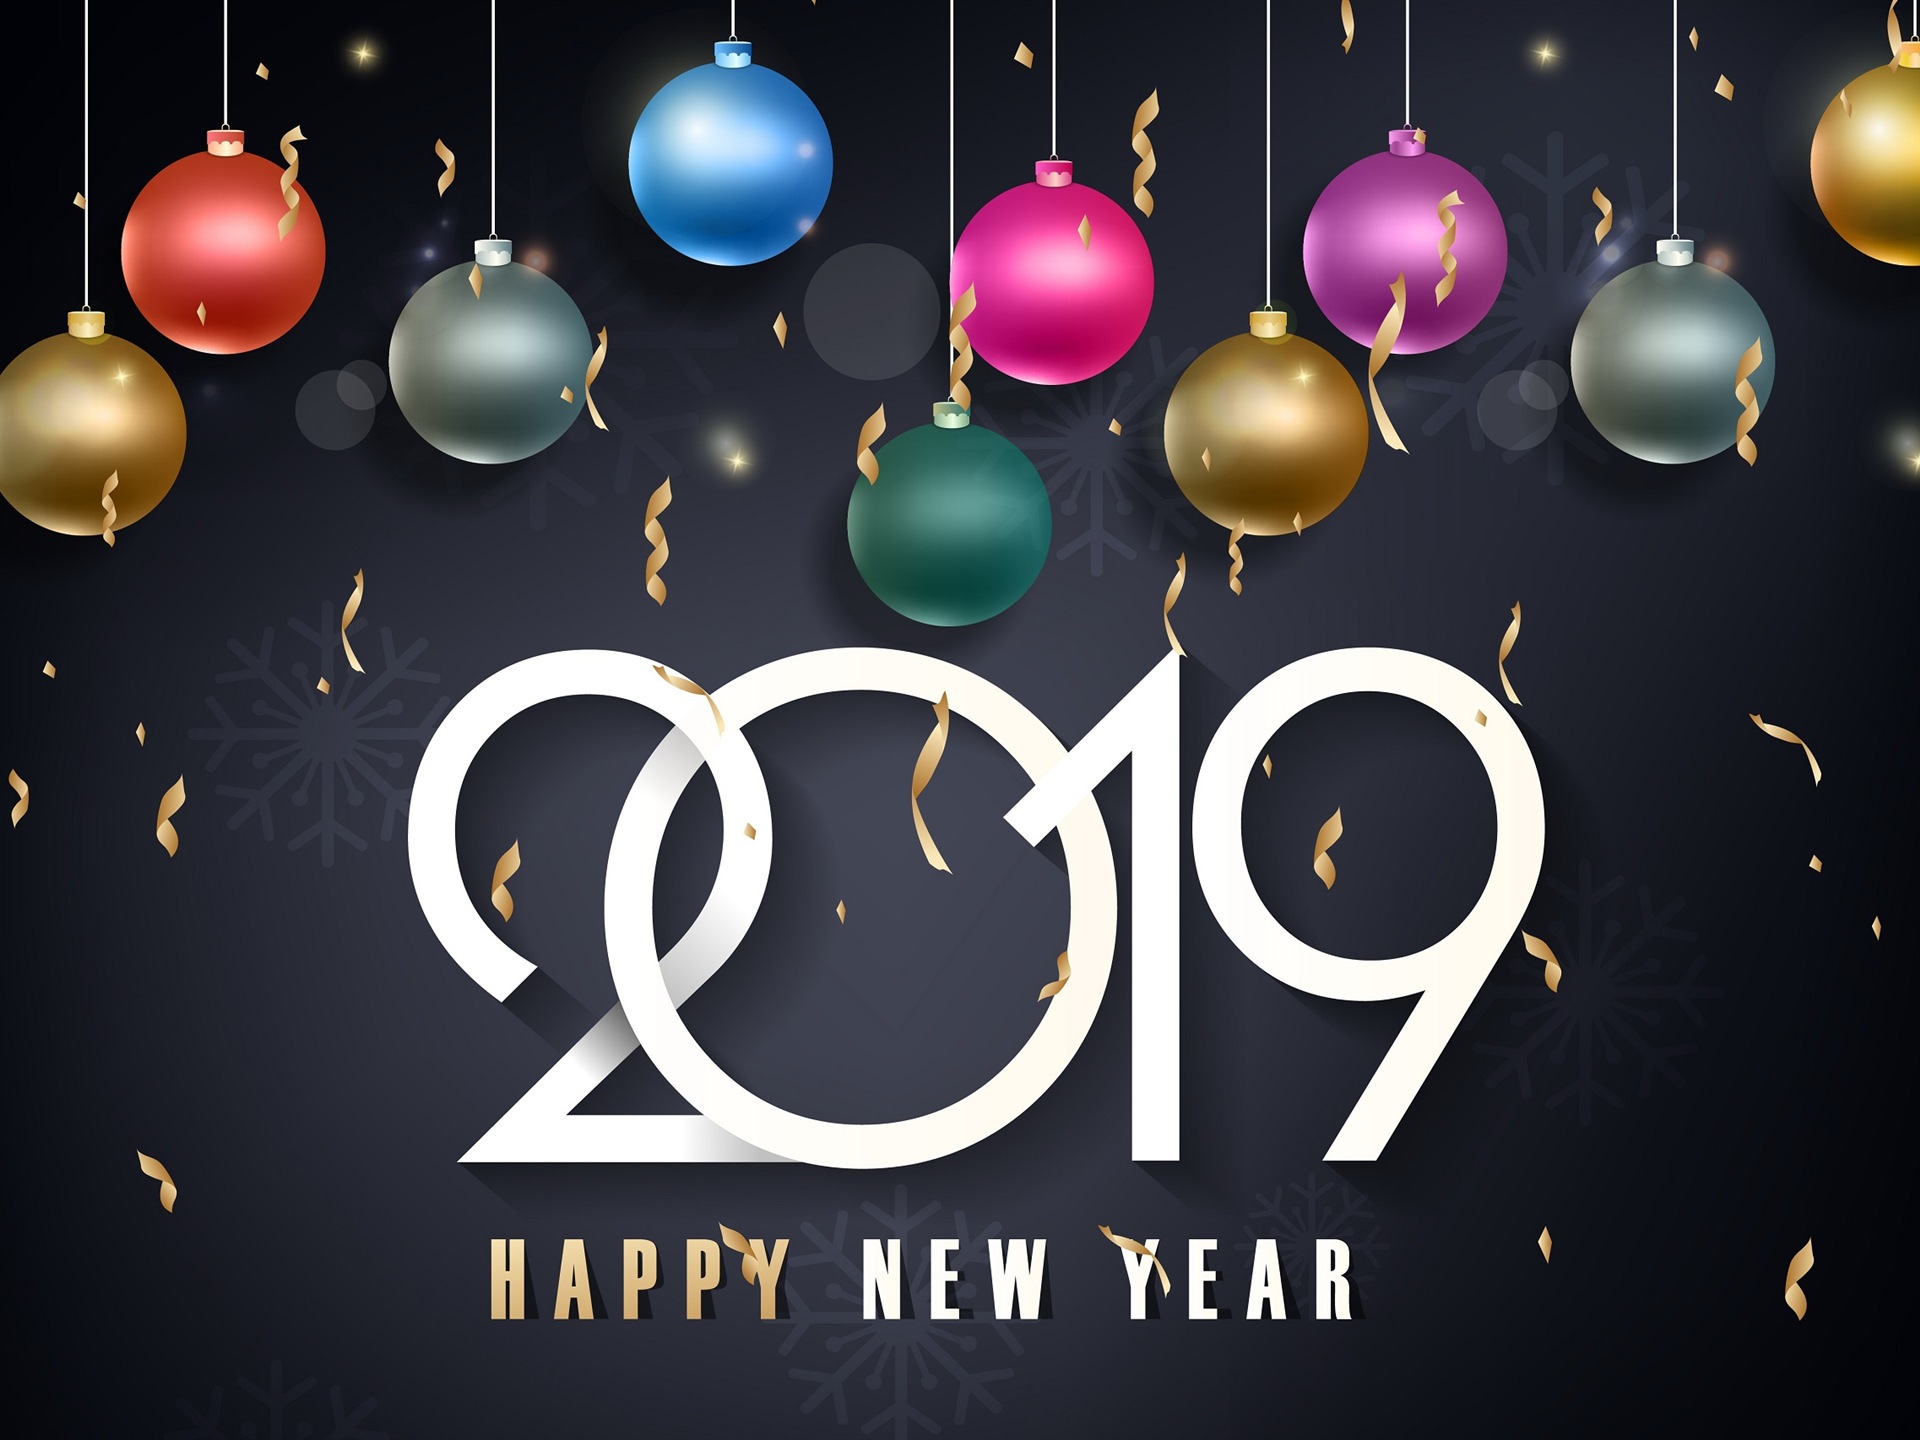 Happy New Year 2019 HD wallpapers #9 - 1920x1440